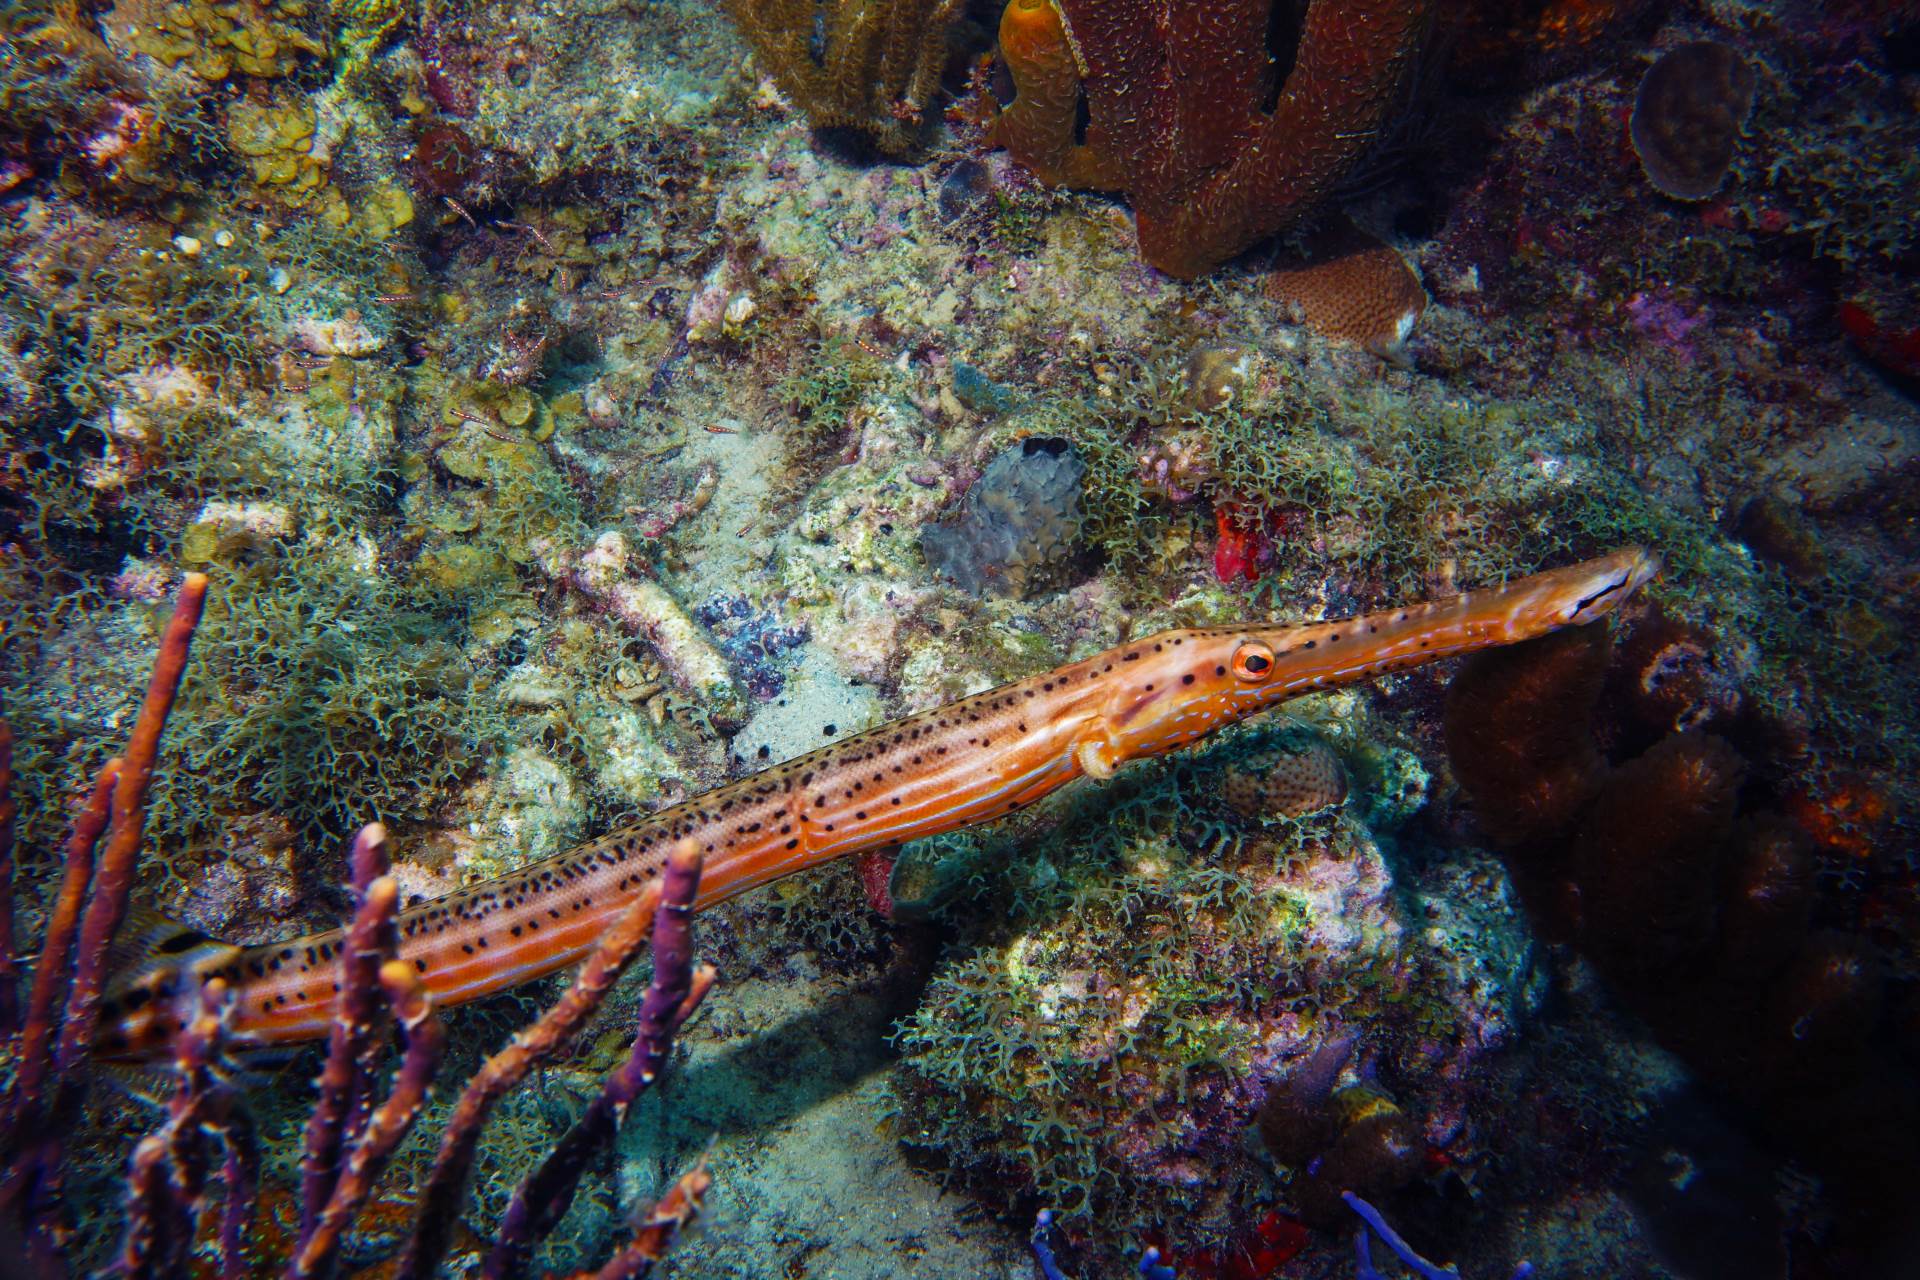 HEre is one of that trumpet fish without my watermark :)